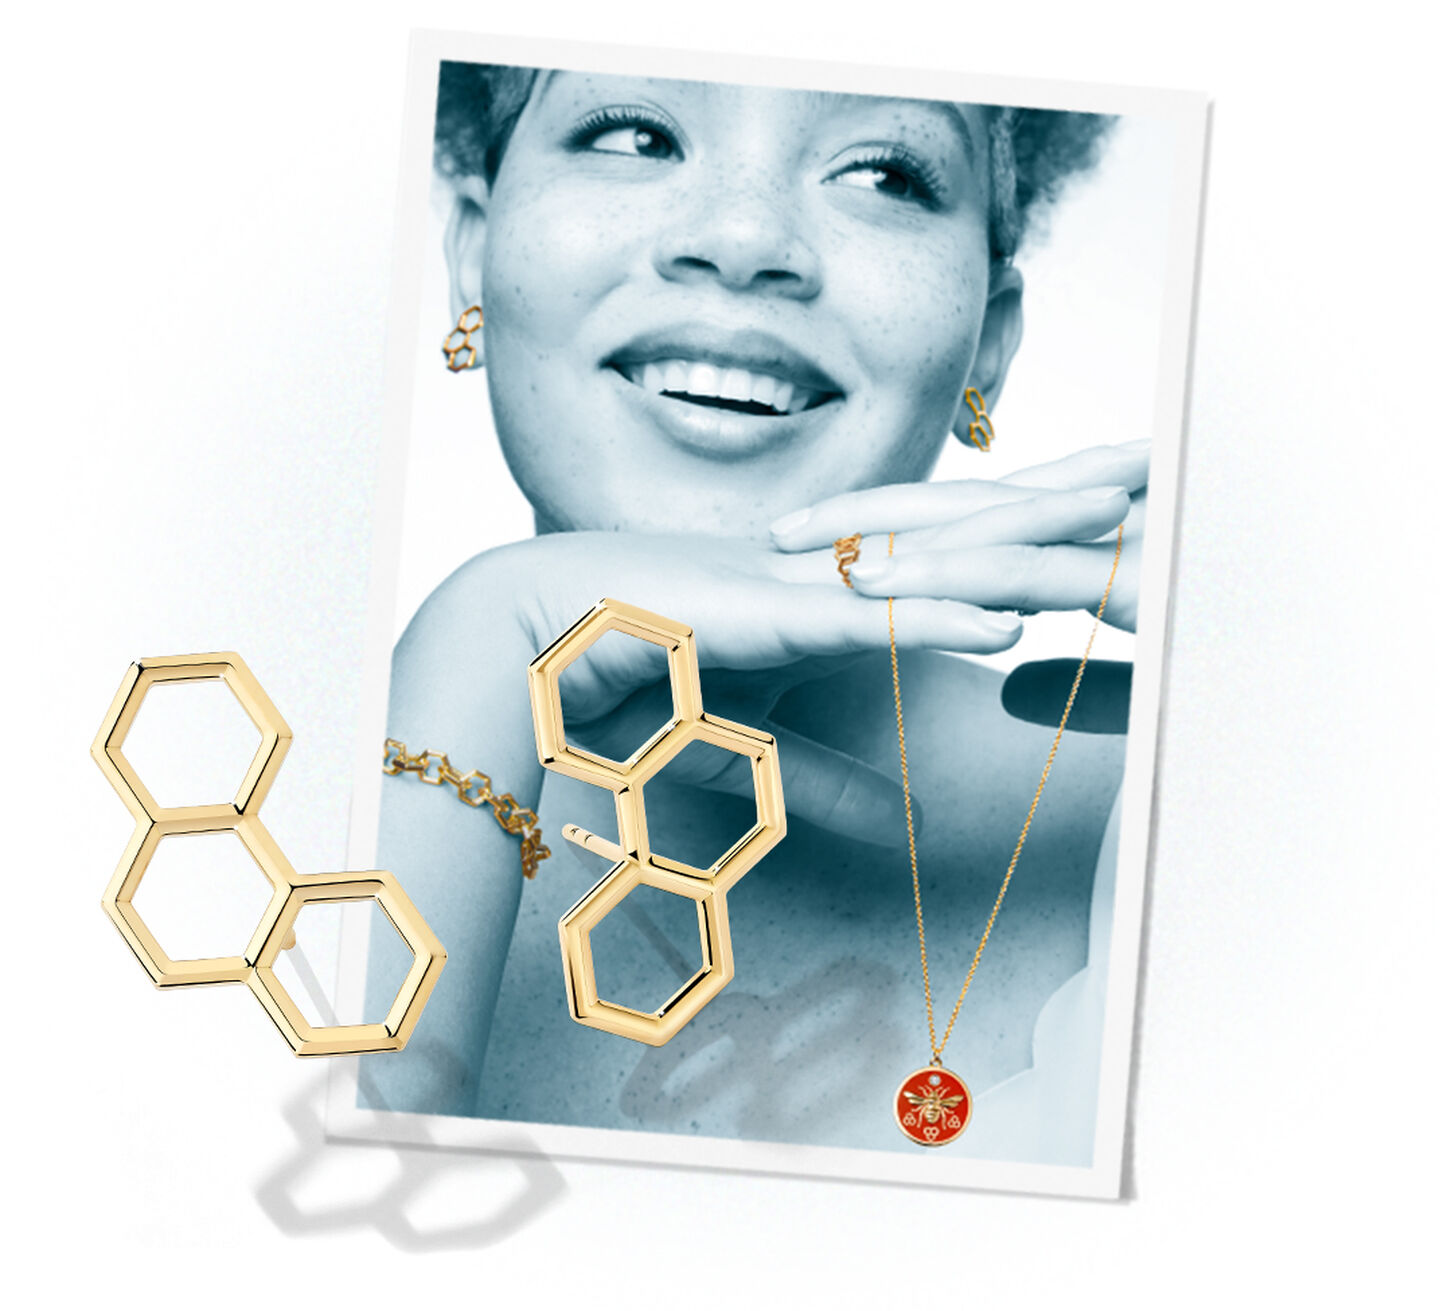 Gold hexagonal drop earrings on a photograph of a smiling model